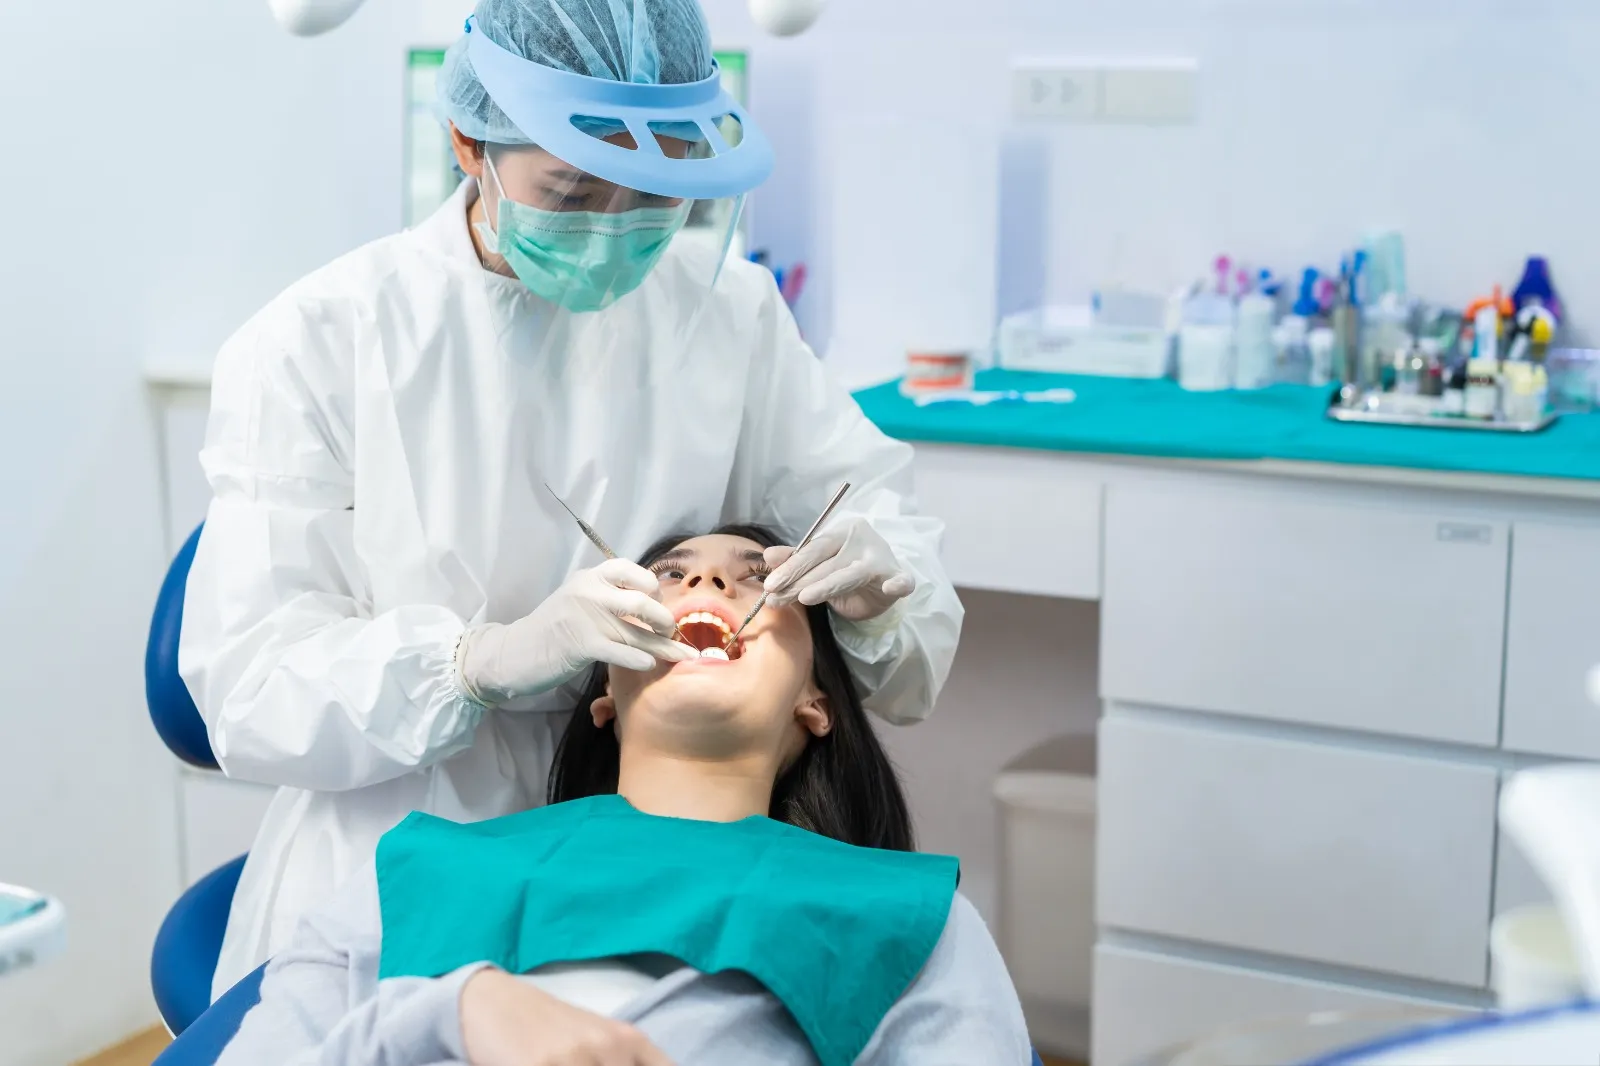 Root Canal Treatment in Singapore: Price, How It Works, & FAQs